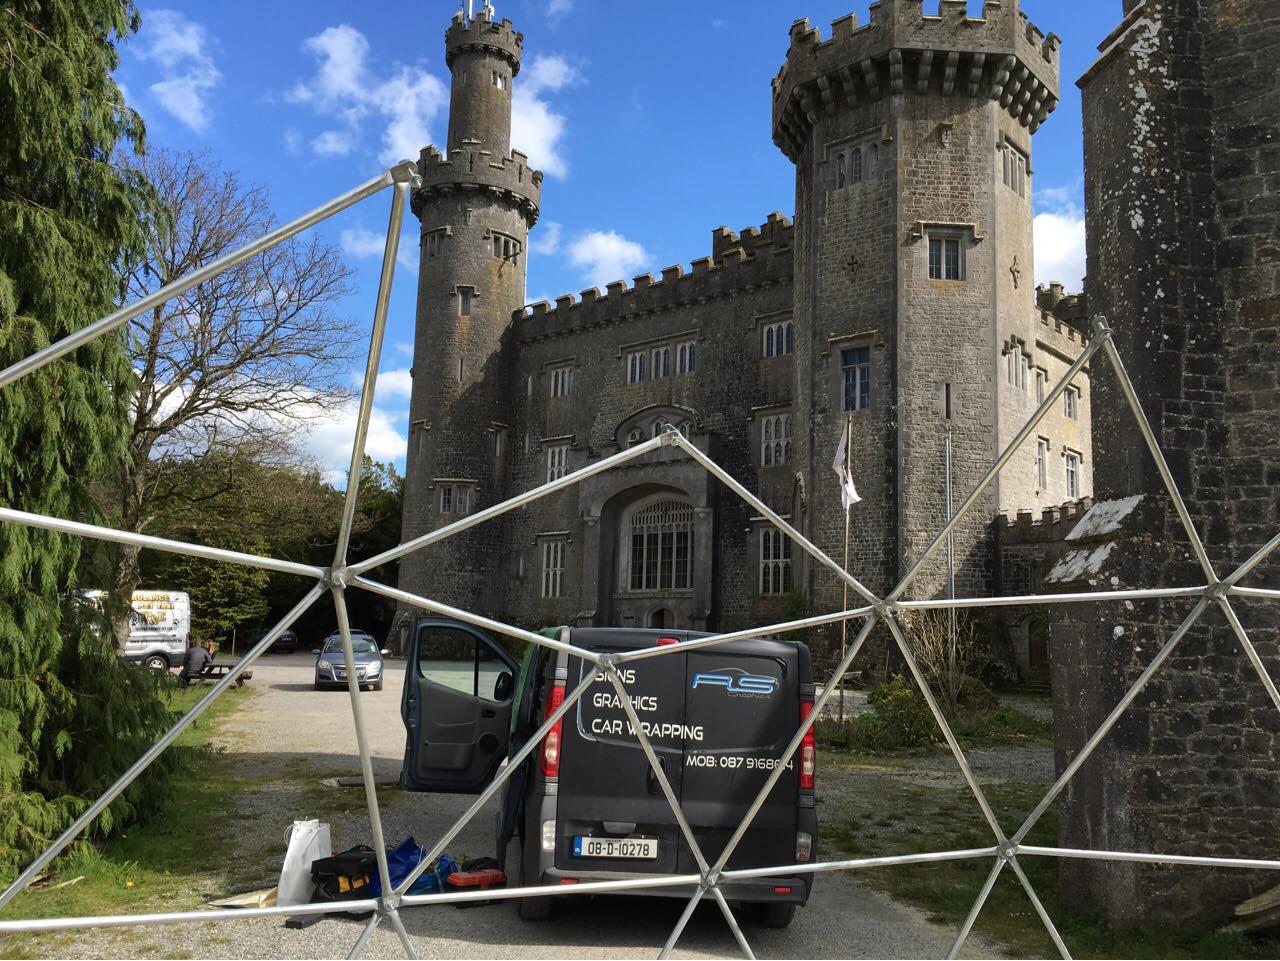 Portable Dome Ø8m for Charleville Castle Event, Tullamore, Ireland